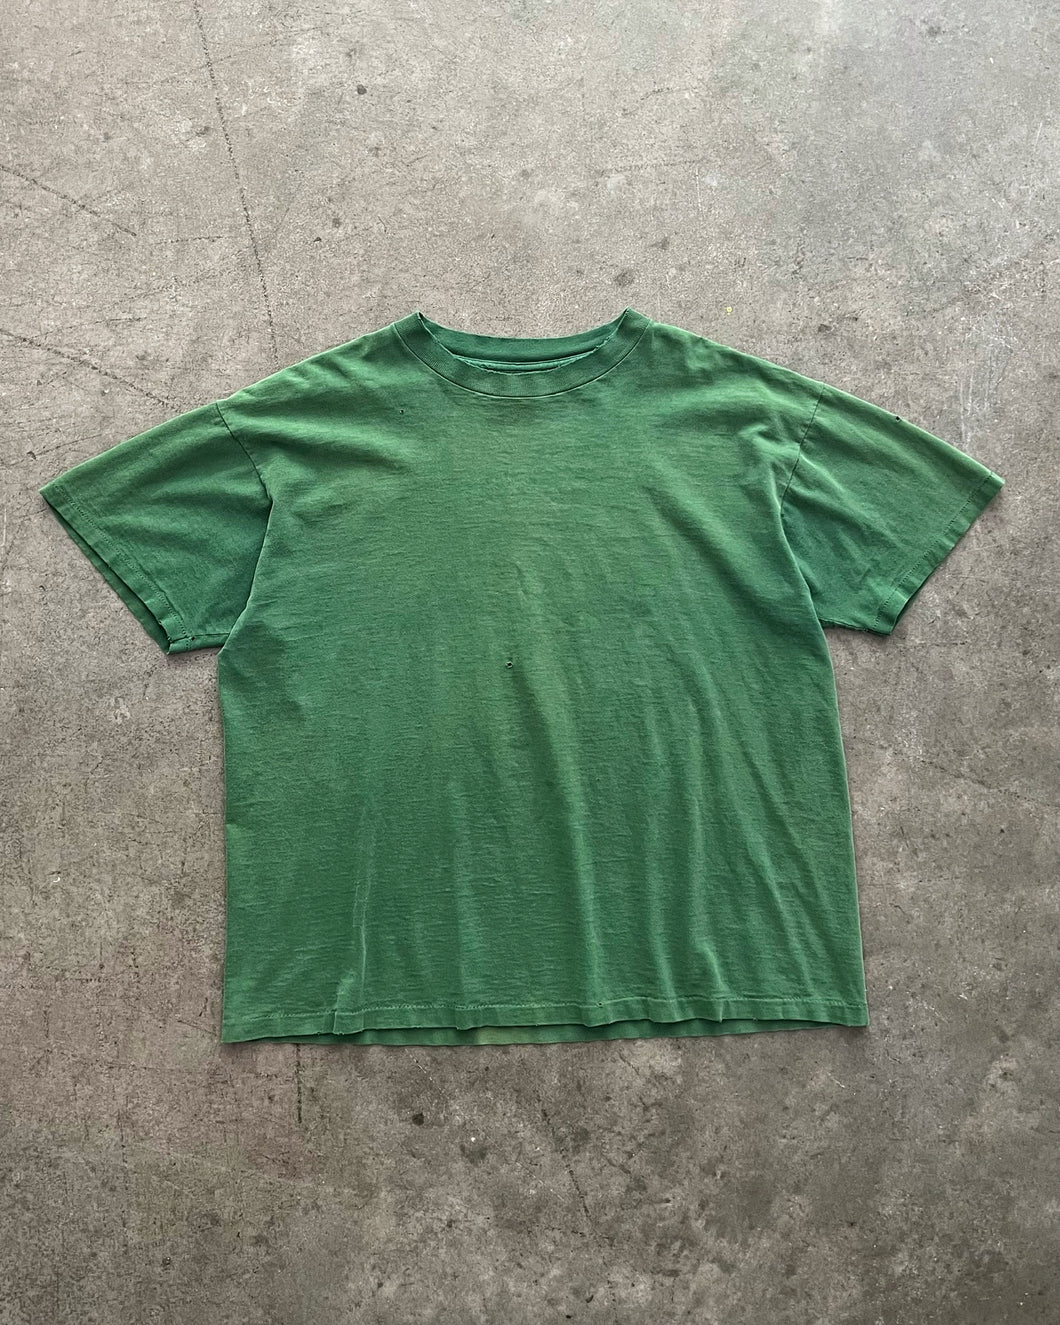 SUN FADED GREEN SINGLE STITCHED TEE - 1990S